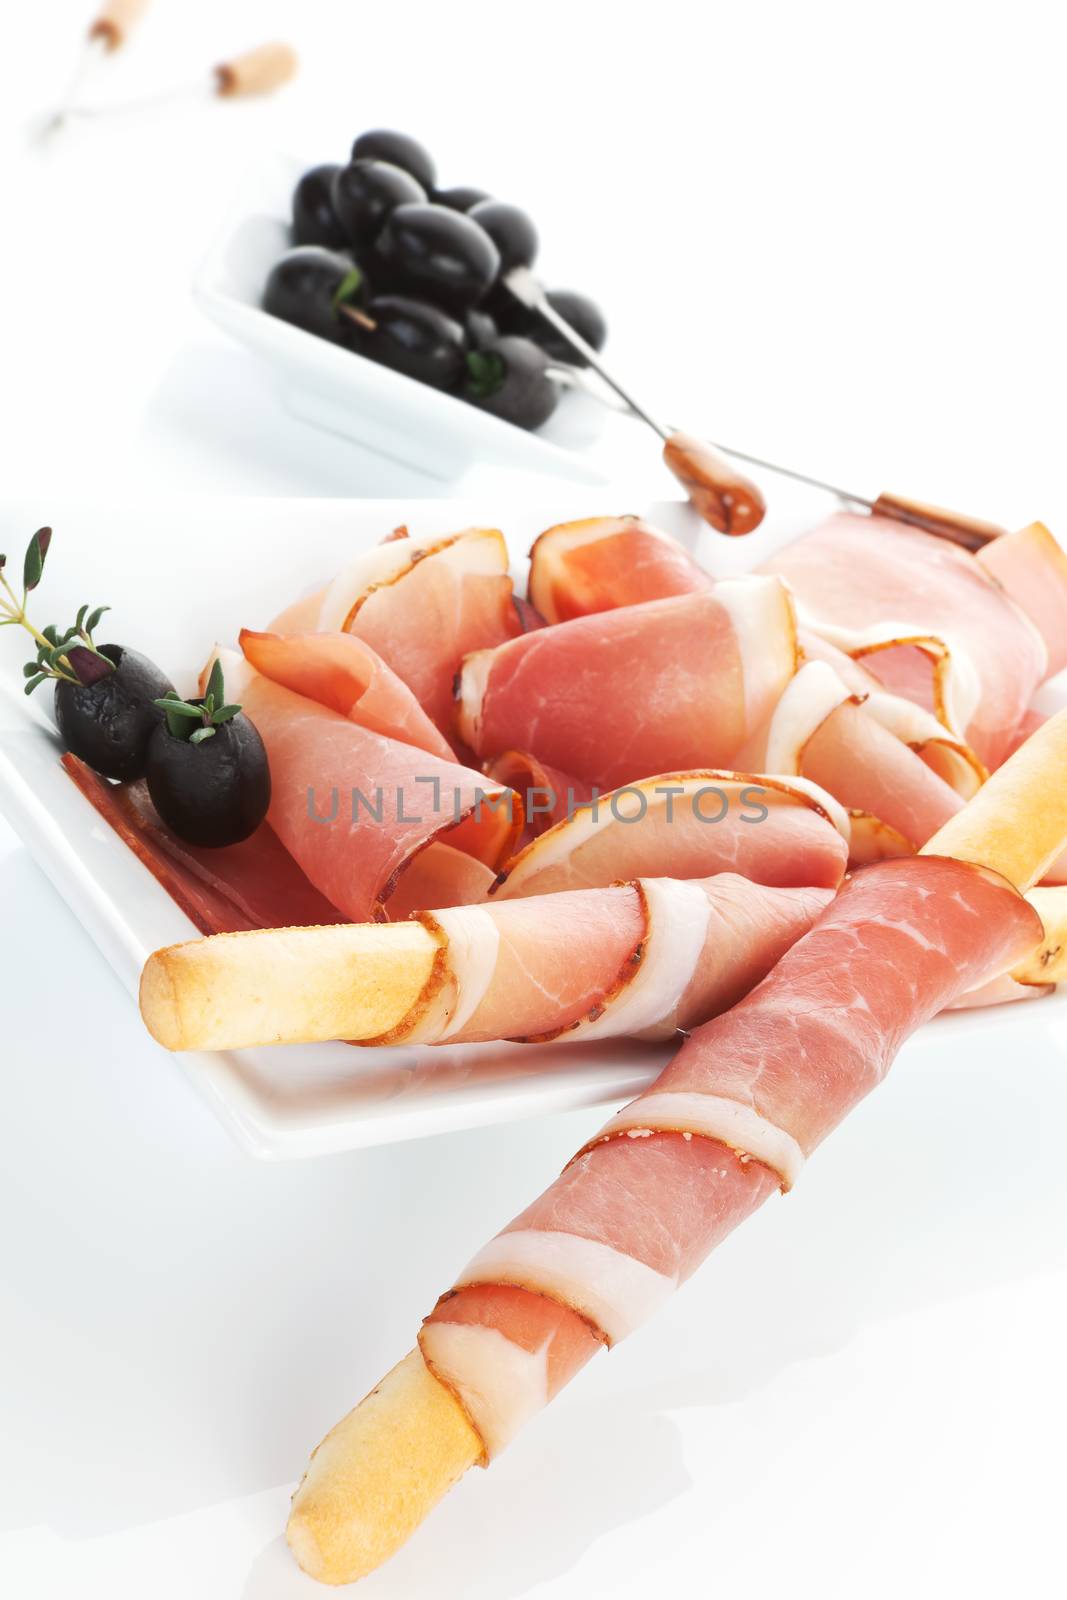 Delicious prosciutto ham background with black olives, fresh herbs and grissini breadsticks.